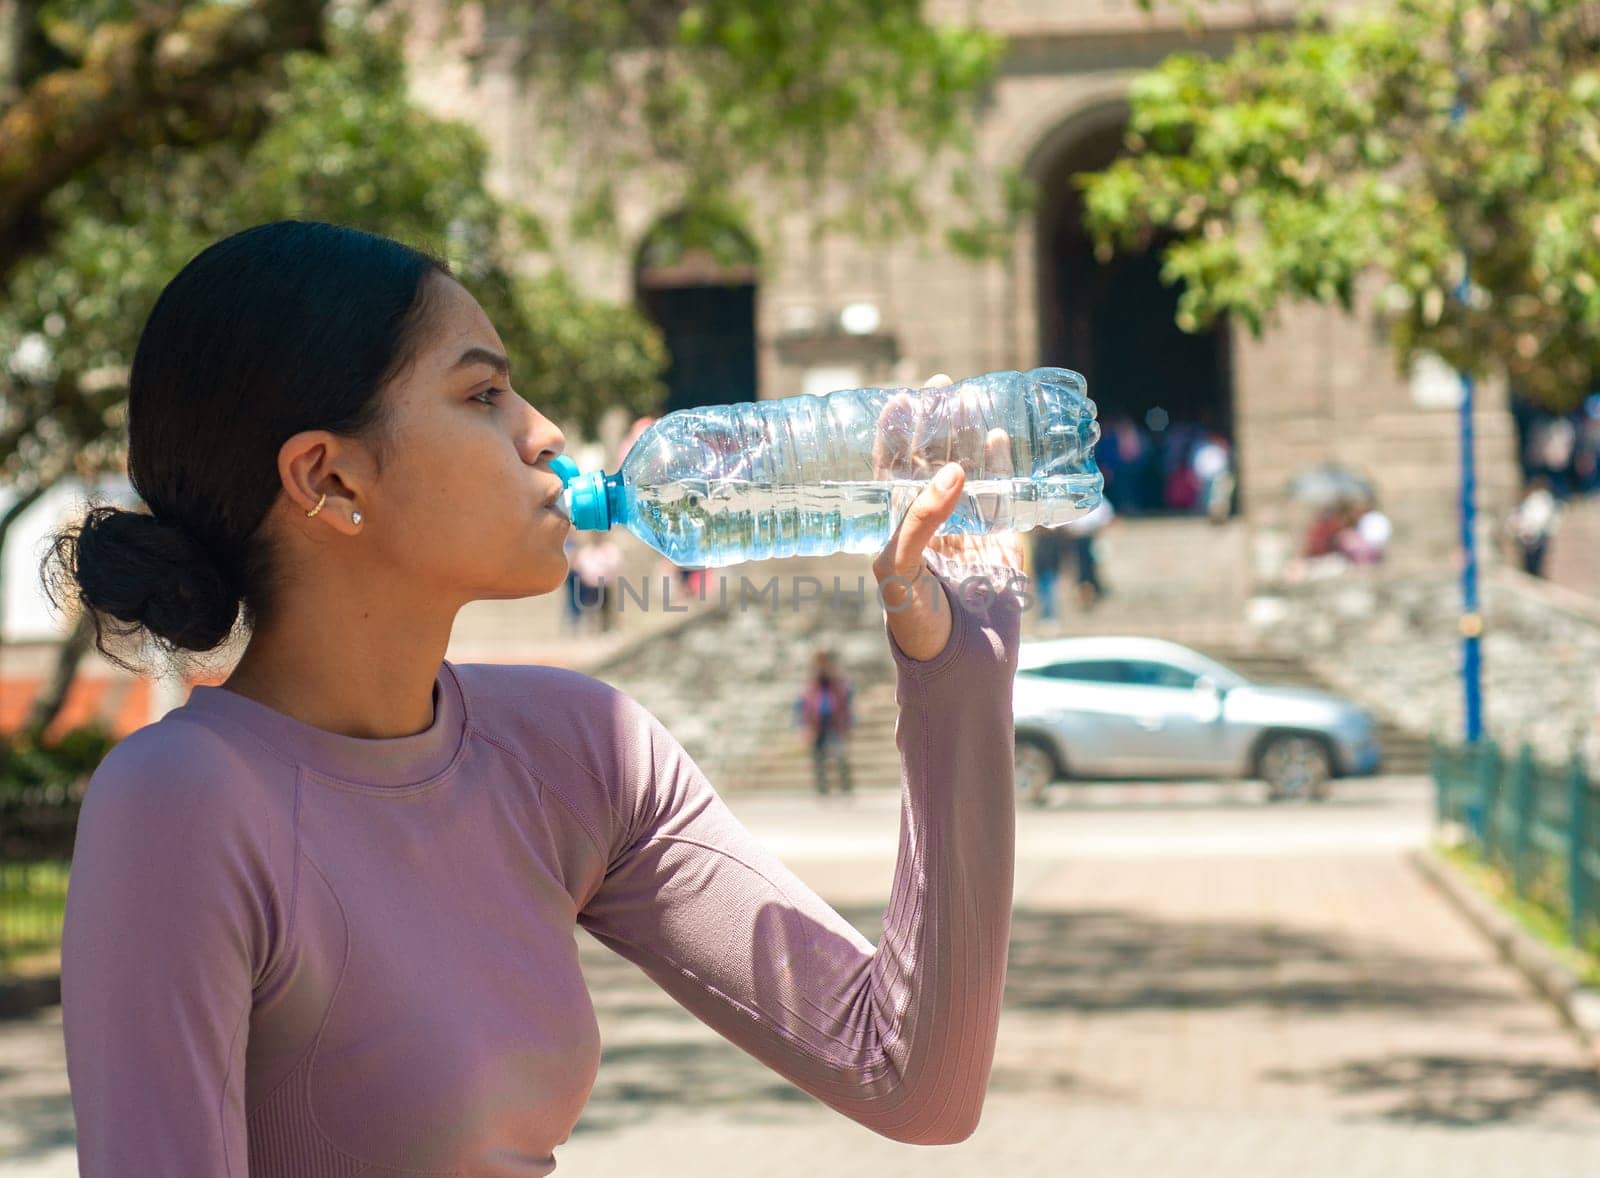 A Latina woman elegantly drinks cool, clear water from a plastic bottle in the city center during a quiet moment in her solo tourist experience. High quality photo